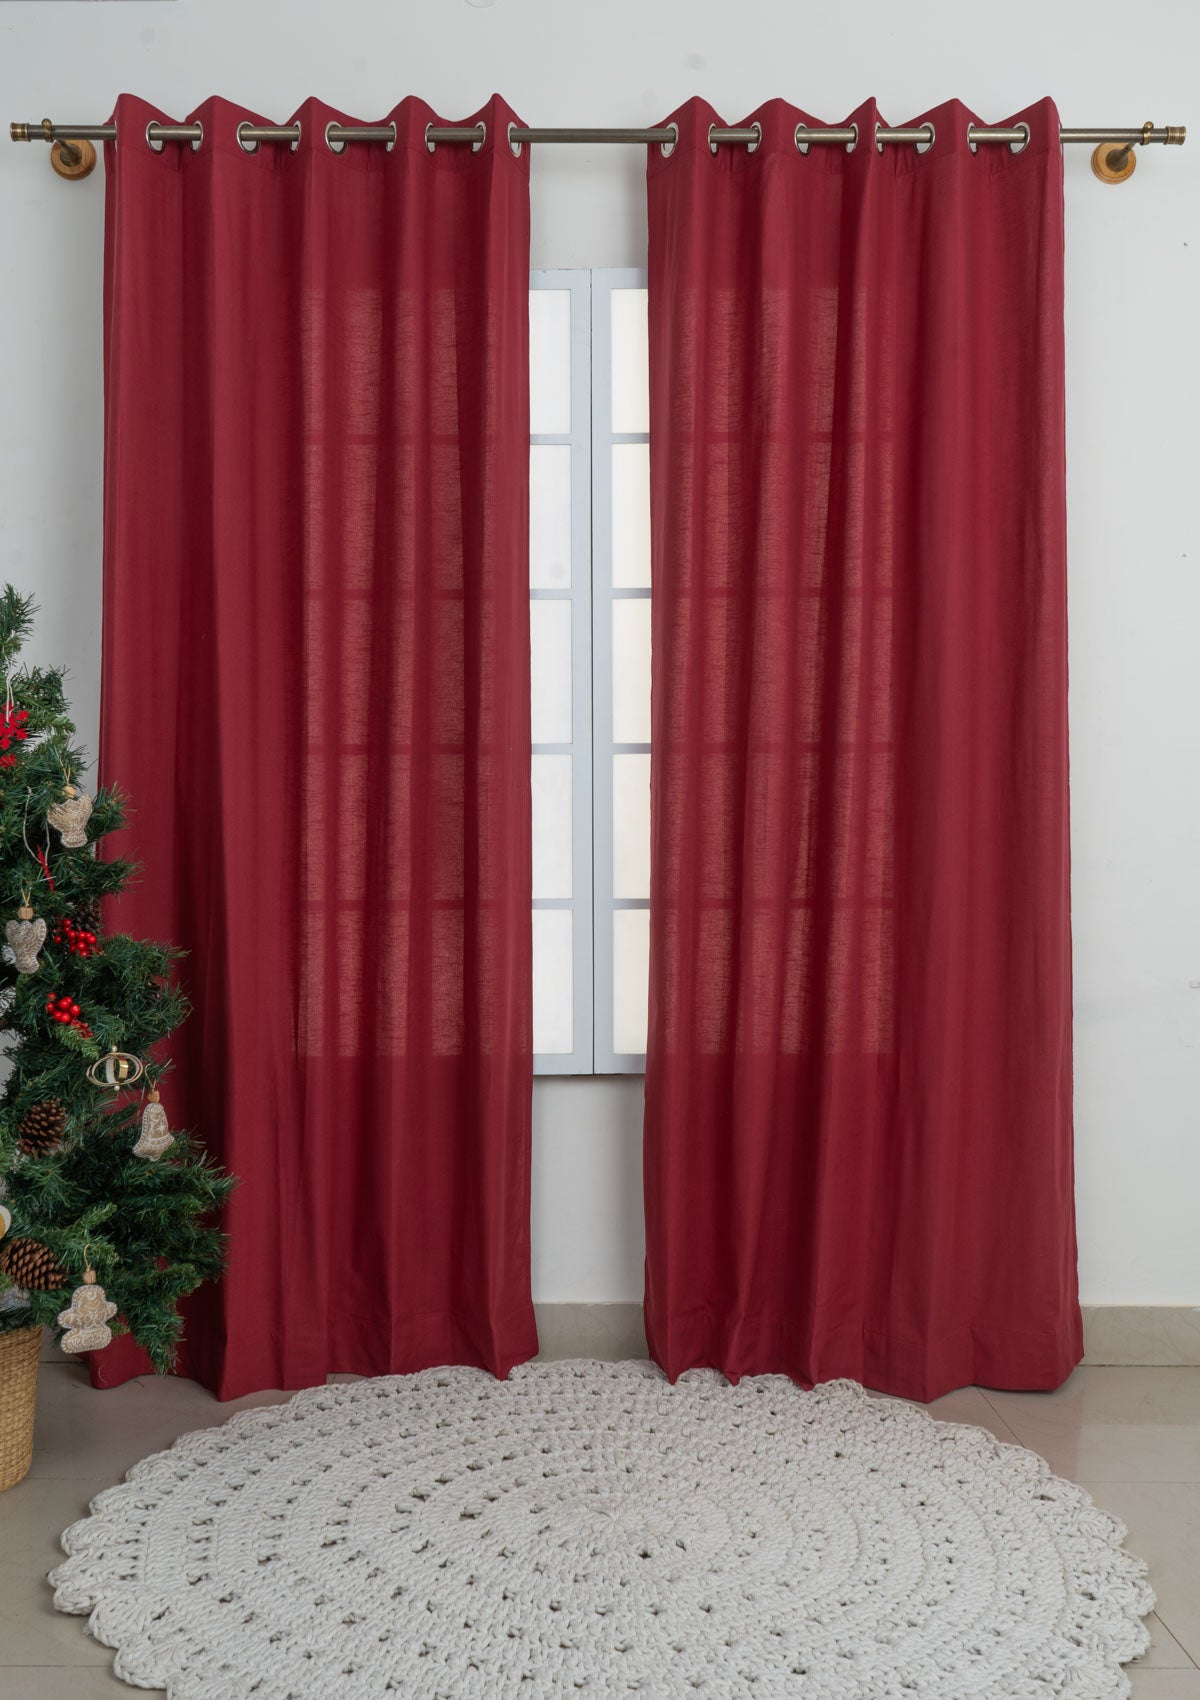 Solid  Wine red 100% cotton plain curtain for bedroom - Room darkening - Pack of 1